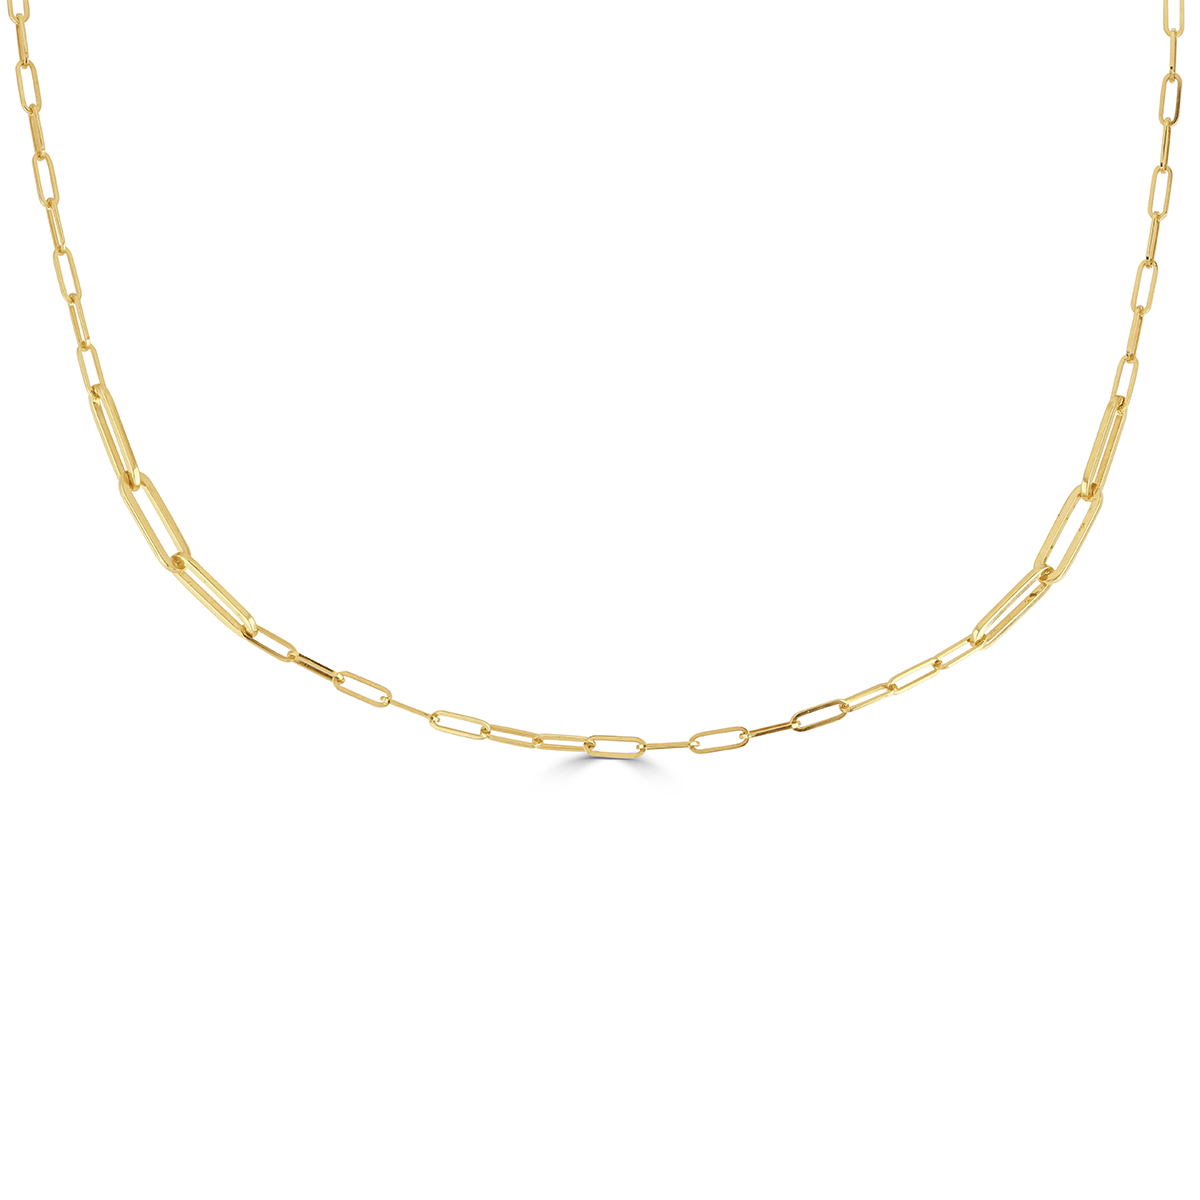 Giallo Yellow Gold Varied Link Necklace